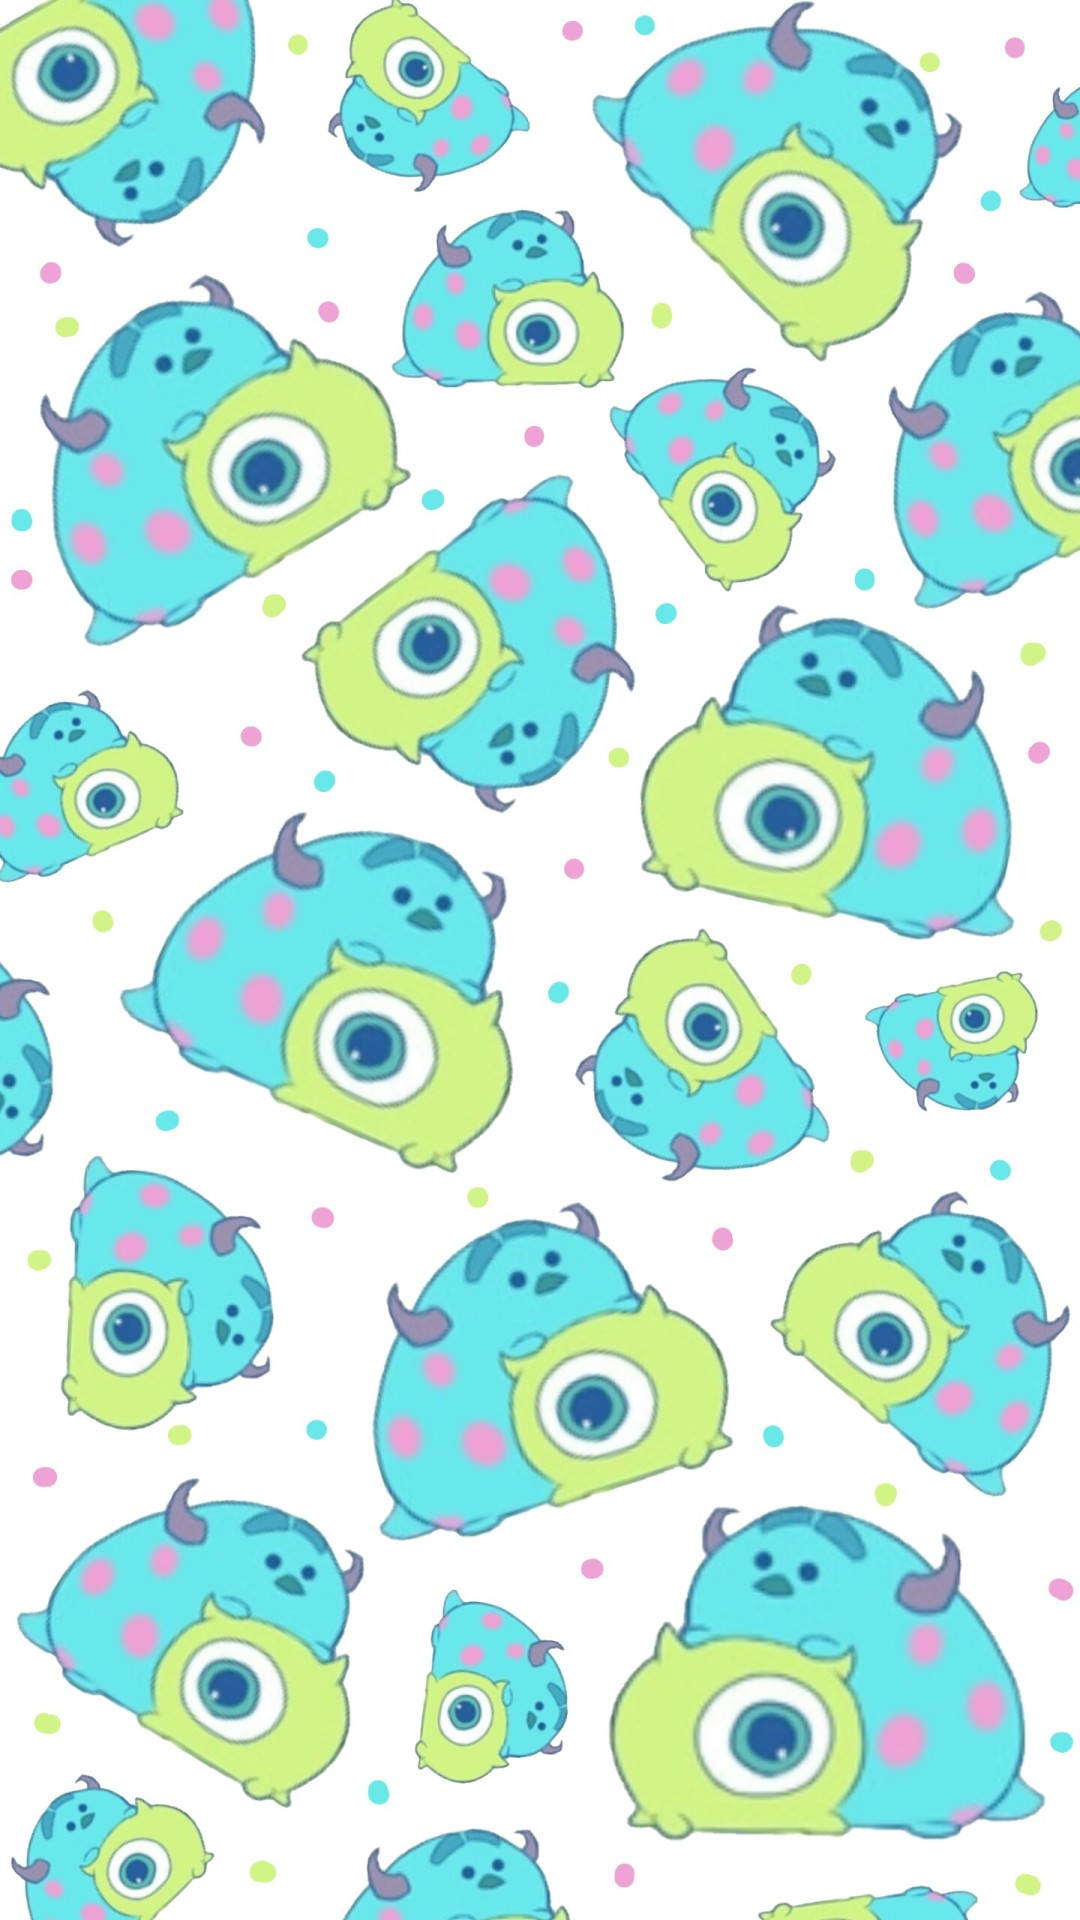 Cute Sulley & Mike Wallpaper